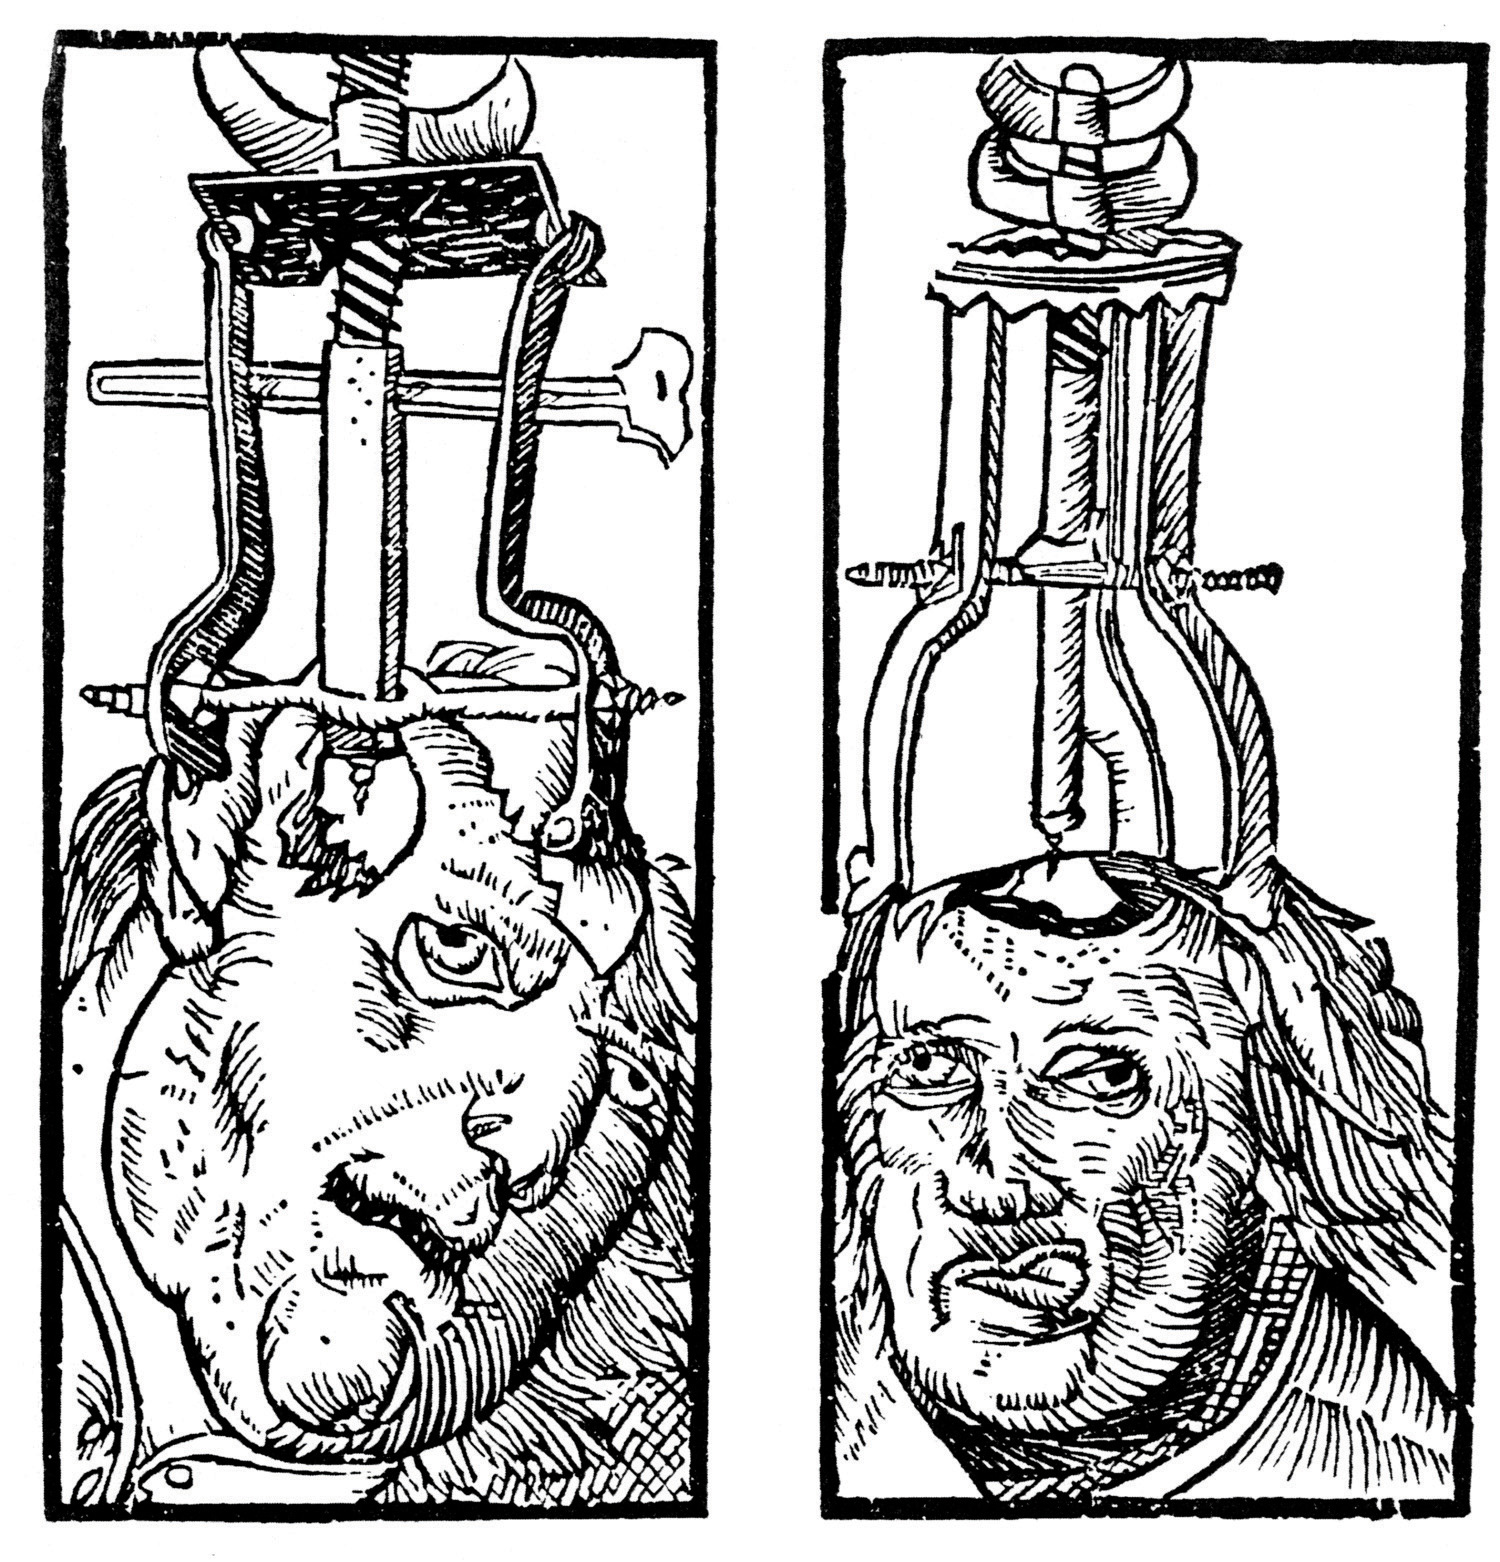 A drawing of holes being drilled into the skull.